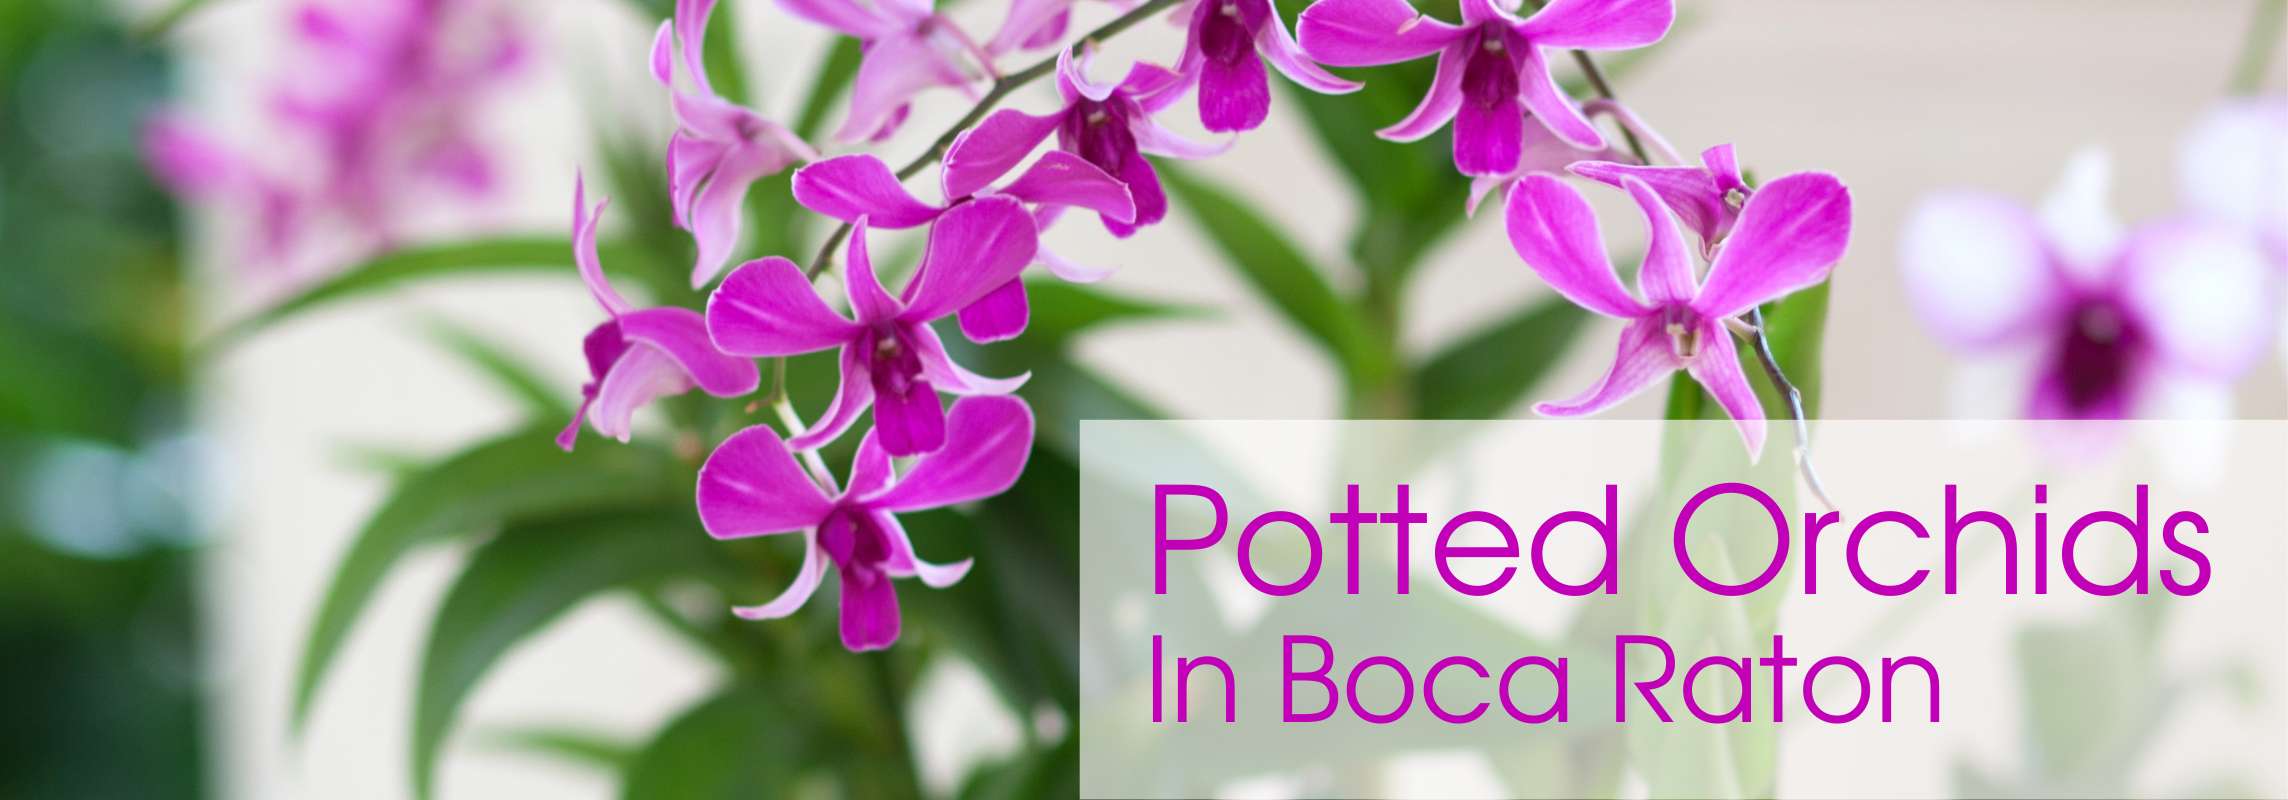 potted orchid plants boca